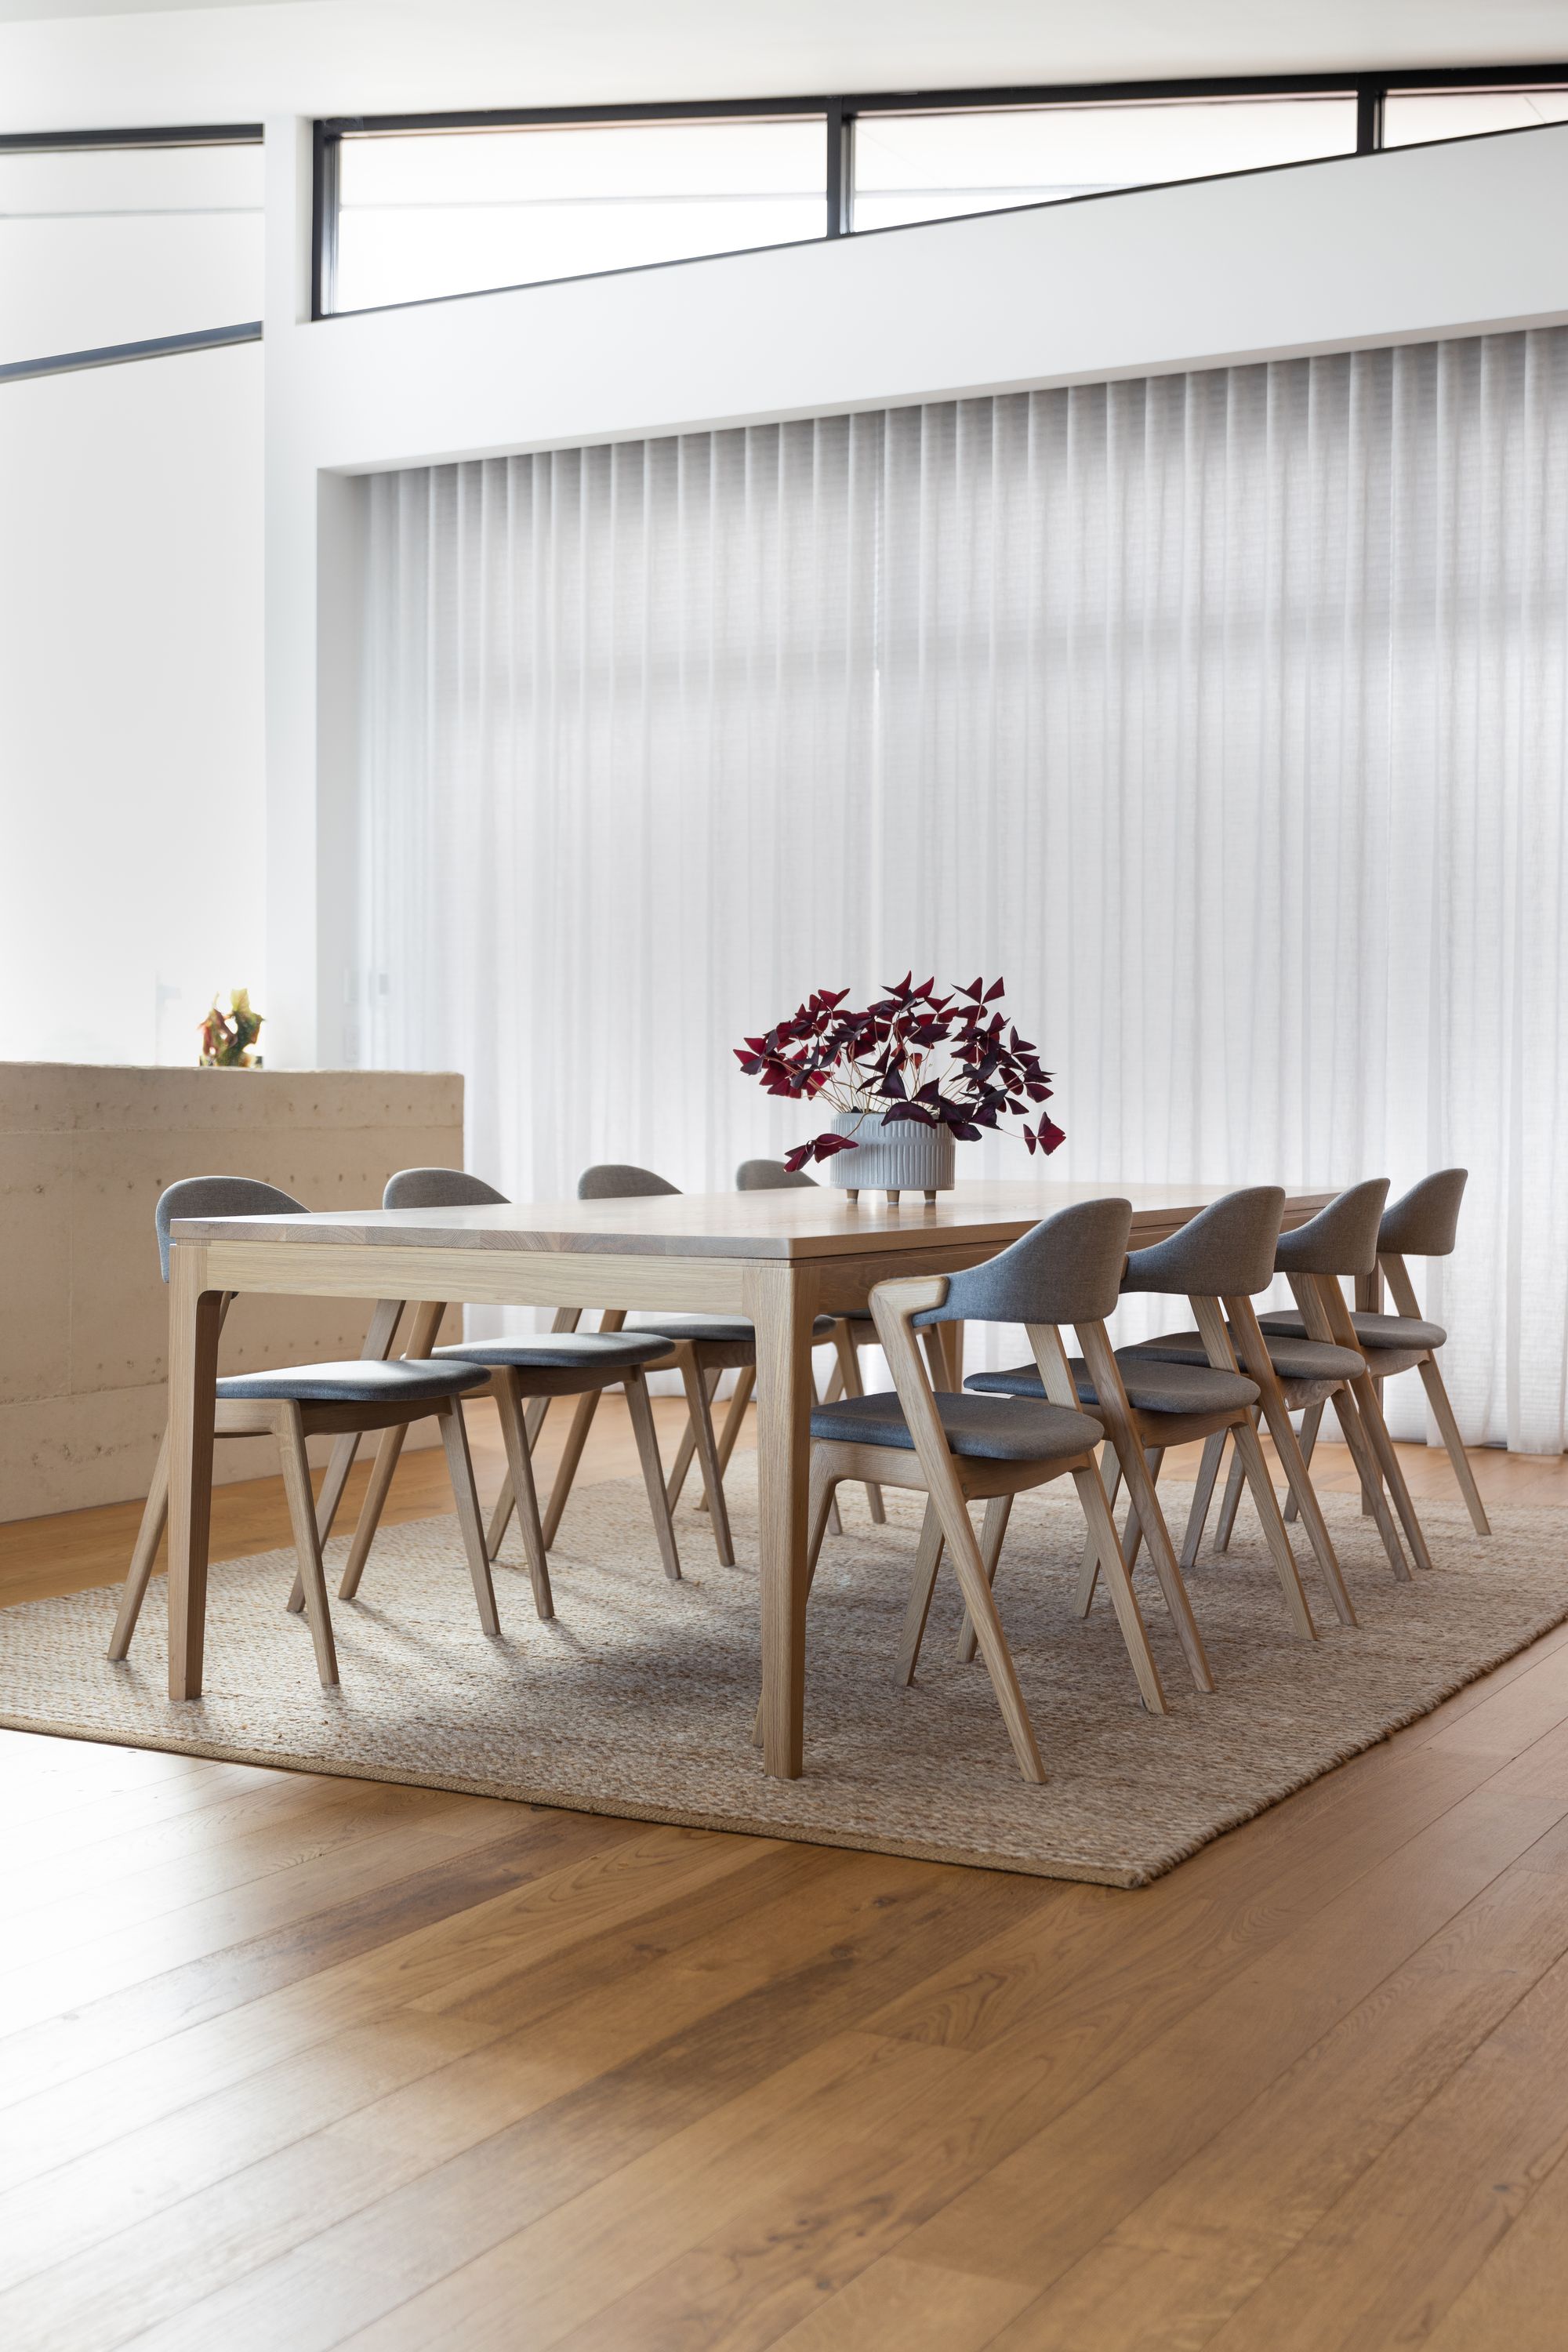 Timberwolf Design: Wistow Dining Table in American Oak.bright dining room with a large window covered by sheer curtains, which soften the natural light that floods the space. The dining table, made of light wood, is placed on a textured beige rug and is accompanied by matching chairs with dark grey cushions. An arrangement of red-leafed plants serves as a centerpiece, adding a vibrant touch of color to the neutral tones of the room.